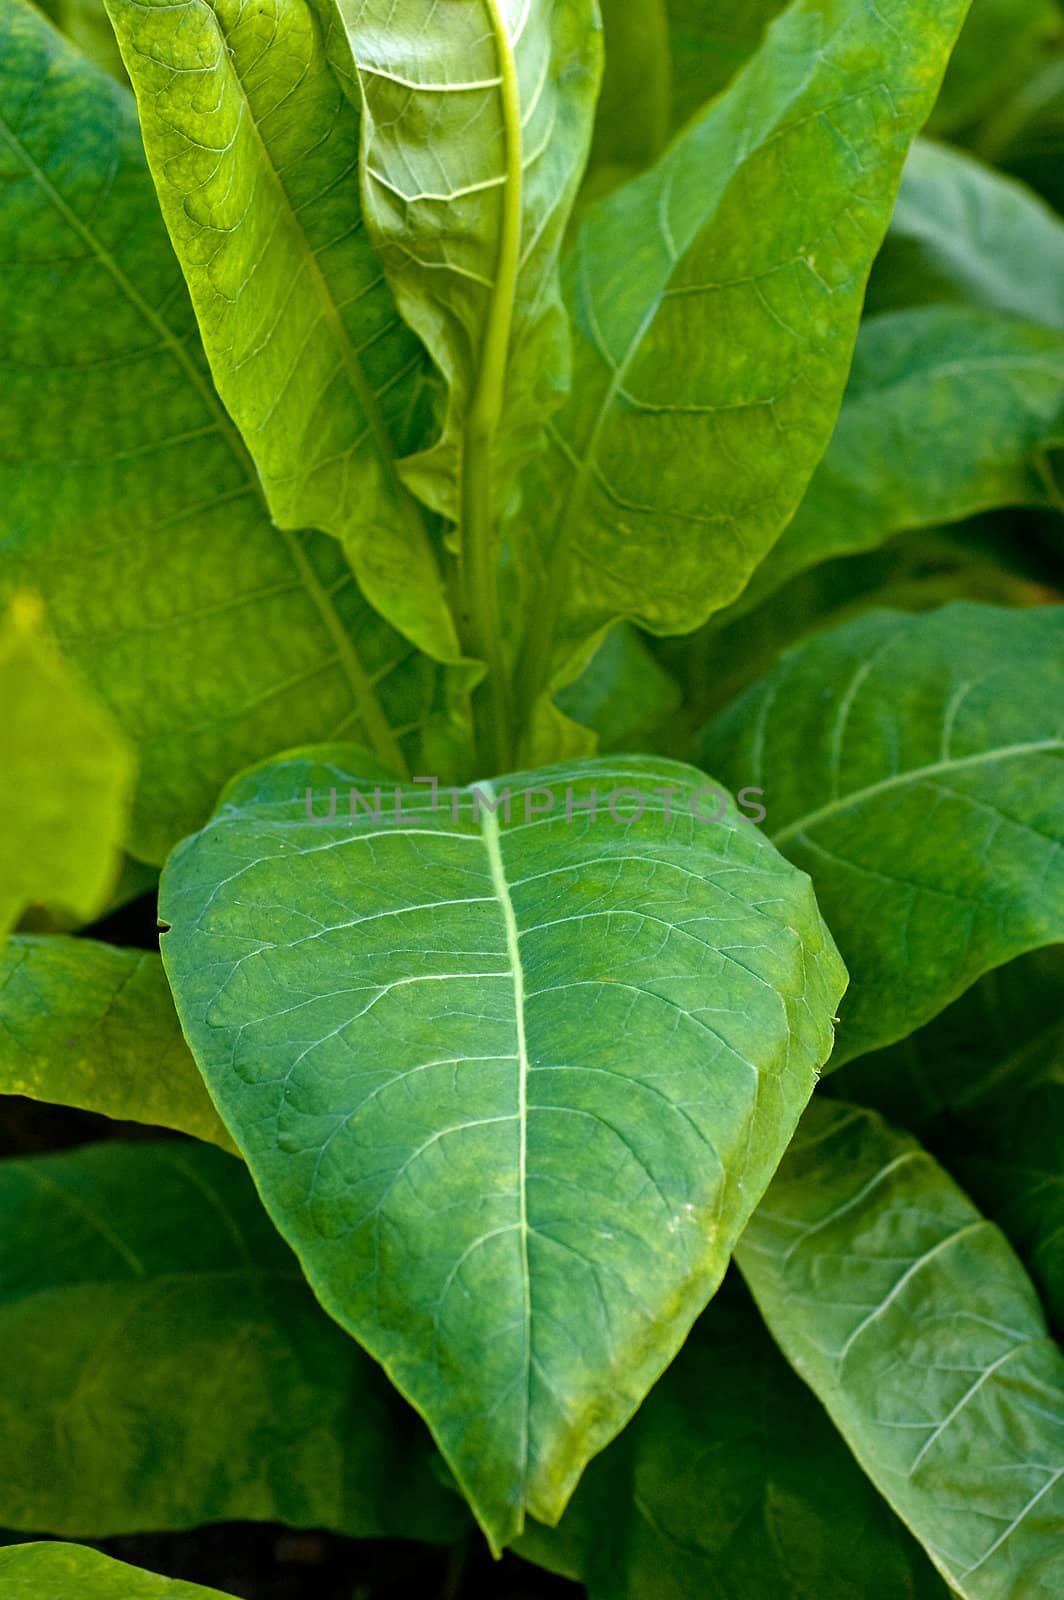 Lines of green tobacco plants on a field